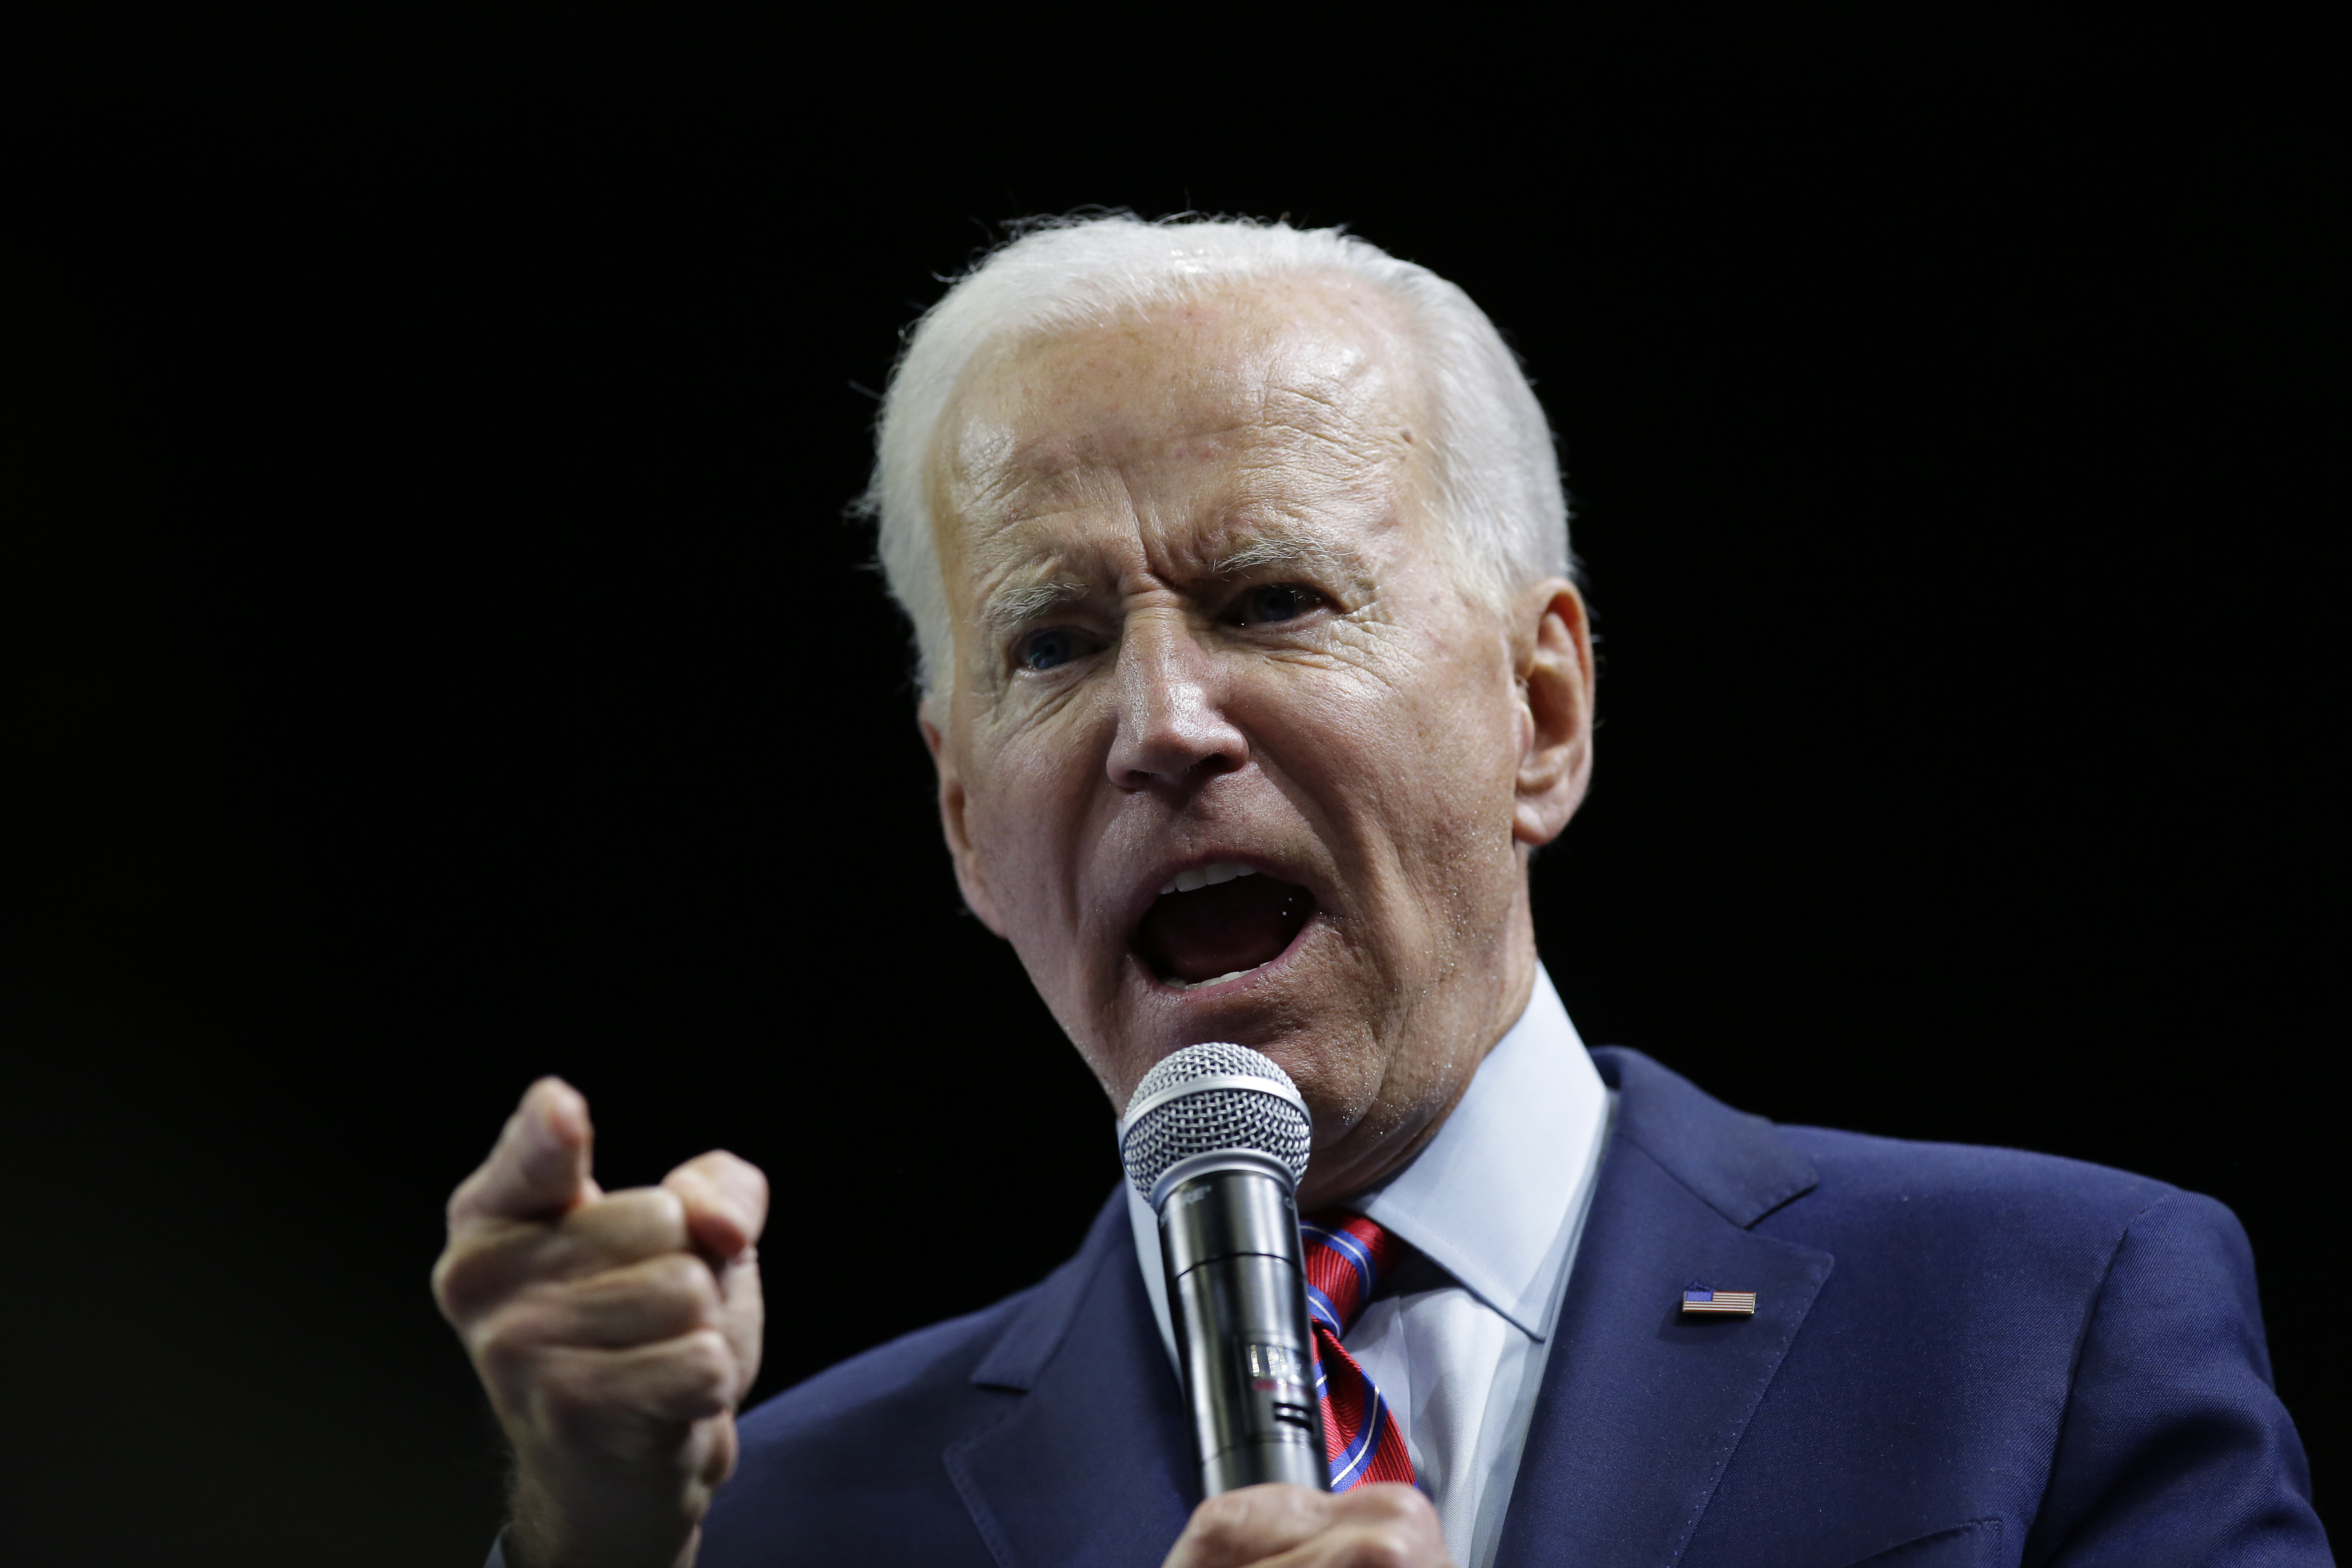 Democratic presidential candidate, former Vice President Joe Biden speaks during the Iowa Democratic Party Liberty & Justice Celebration on November 1, 2019 in Des Moines, Iowa. Fourteen presidential are expected to speak at the event addressing over 12,000 people. (Photo by Joshua Lott/Getty Images)